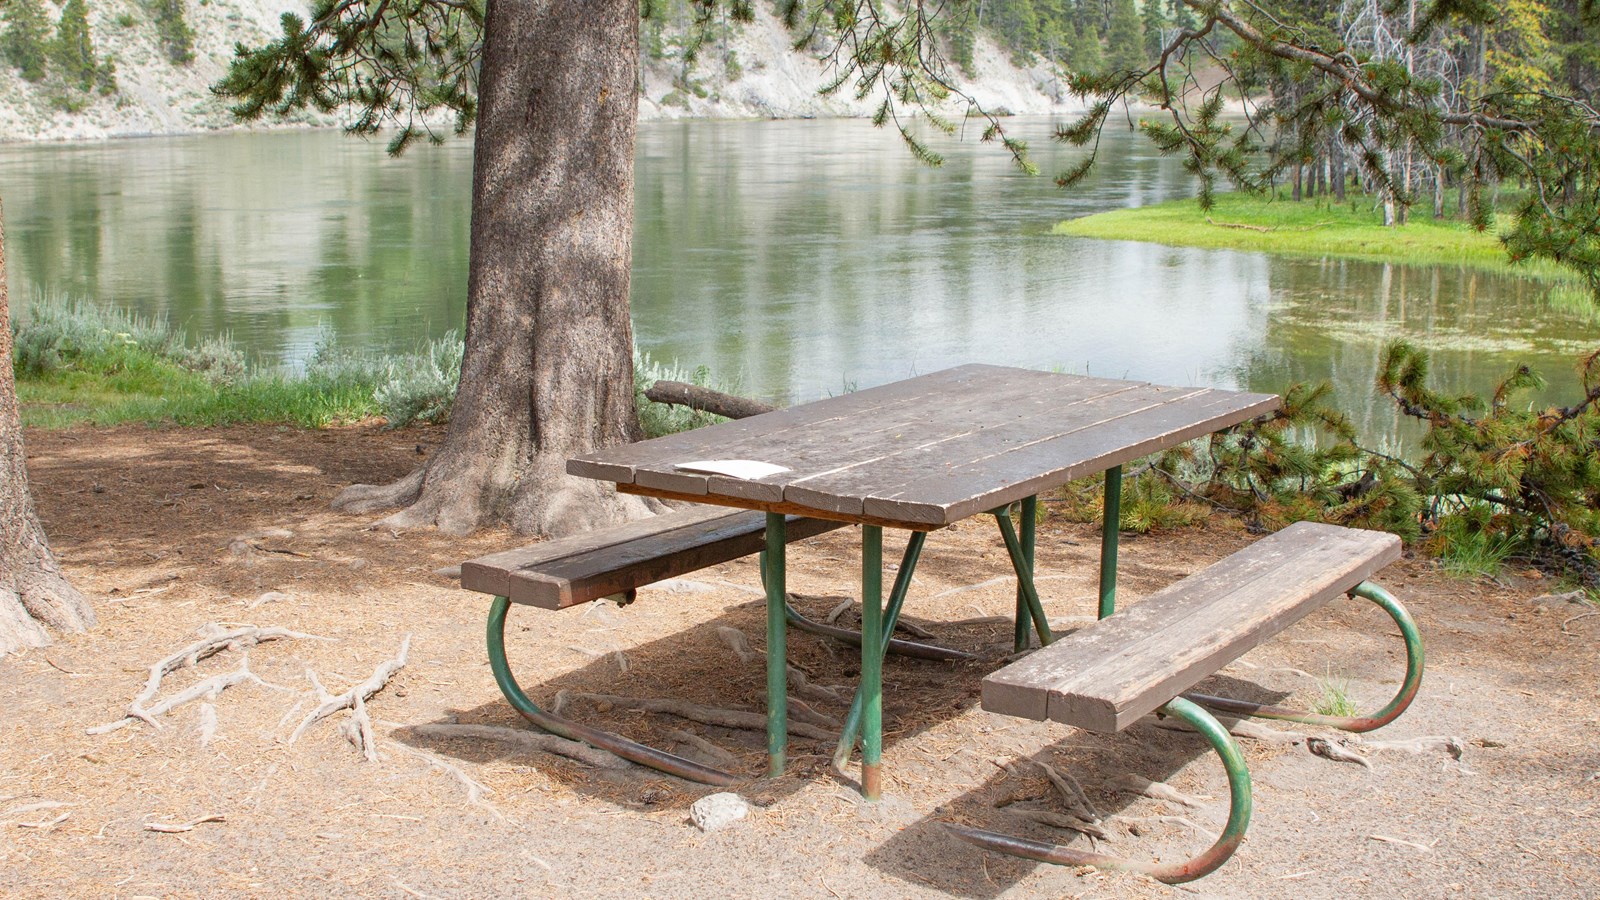 A picnic table in front of a river that is lined by trees